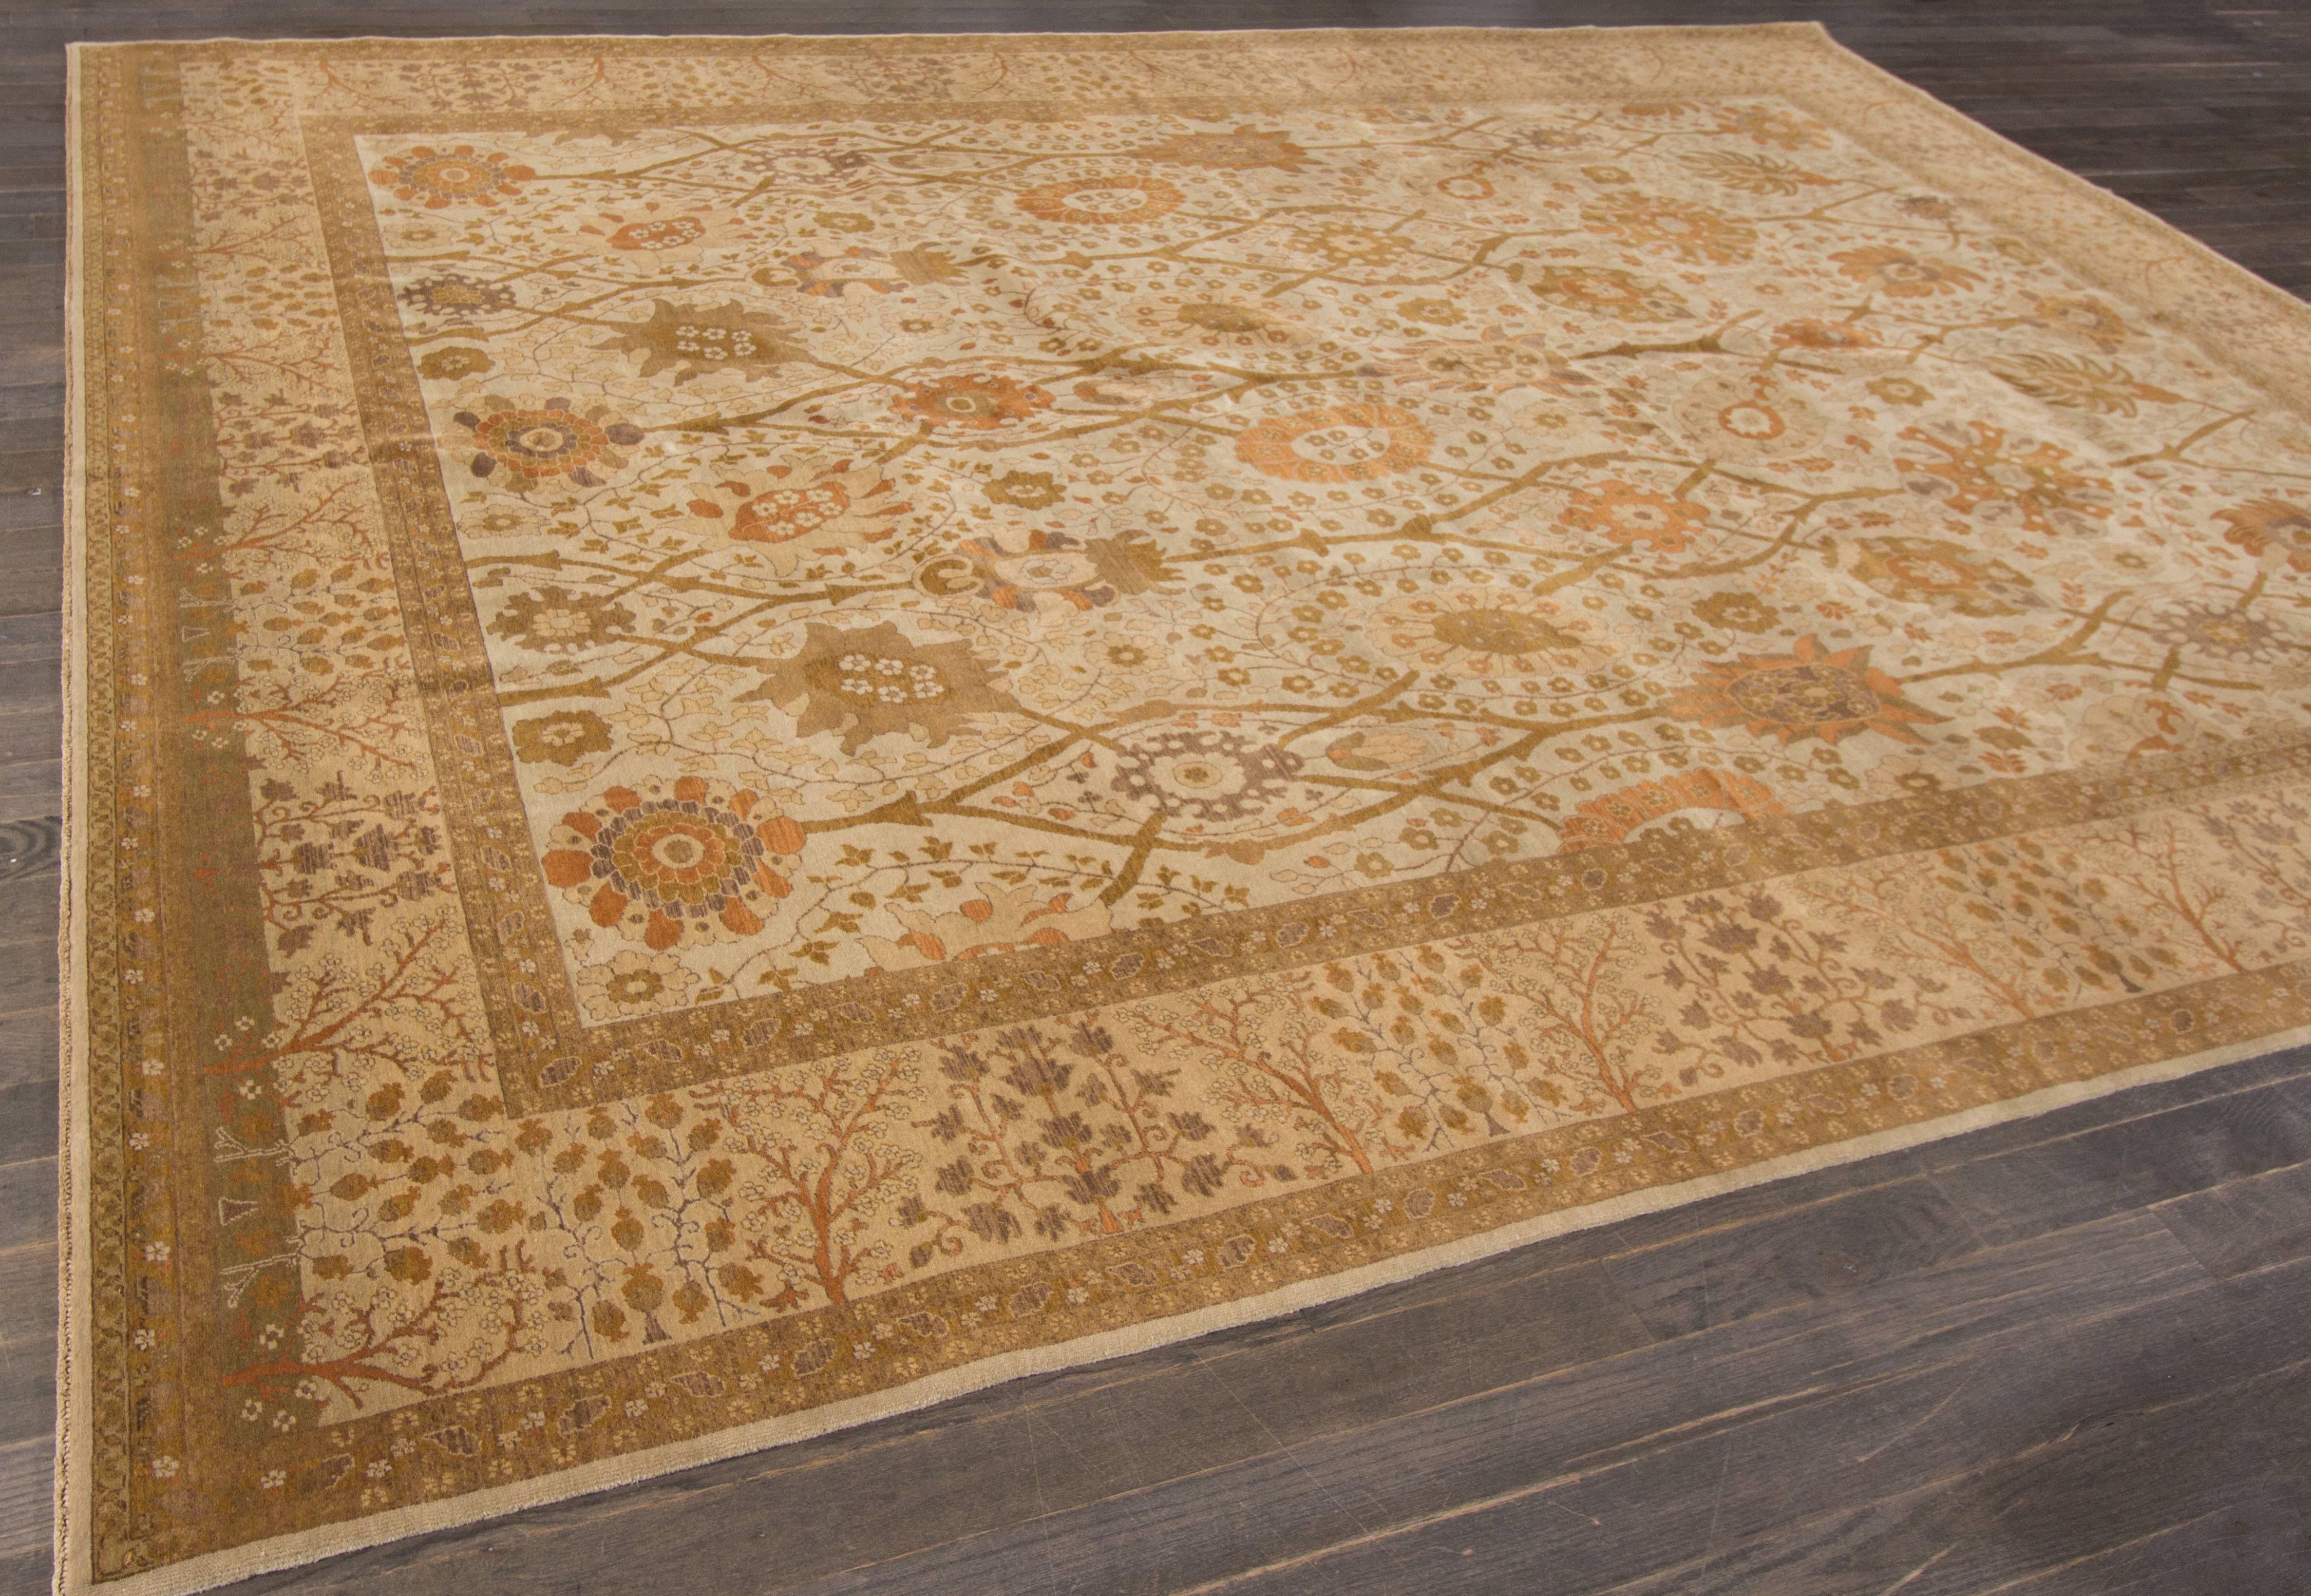 This beautiful Vintage Persian Tabriz hand-knotted design rug will make your floor look splendid. This collection is made in wool. Its measures are: 9'.1 x 12'.1
This vintage Persian Tabriz rug was made in Iran.